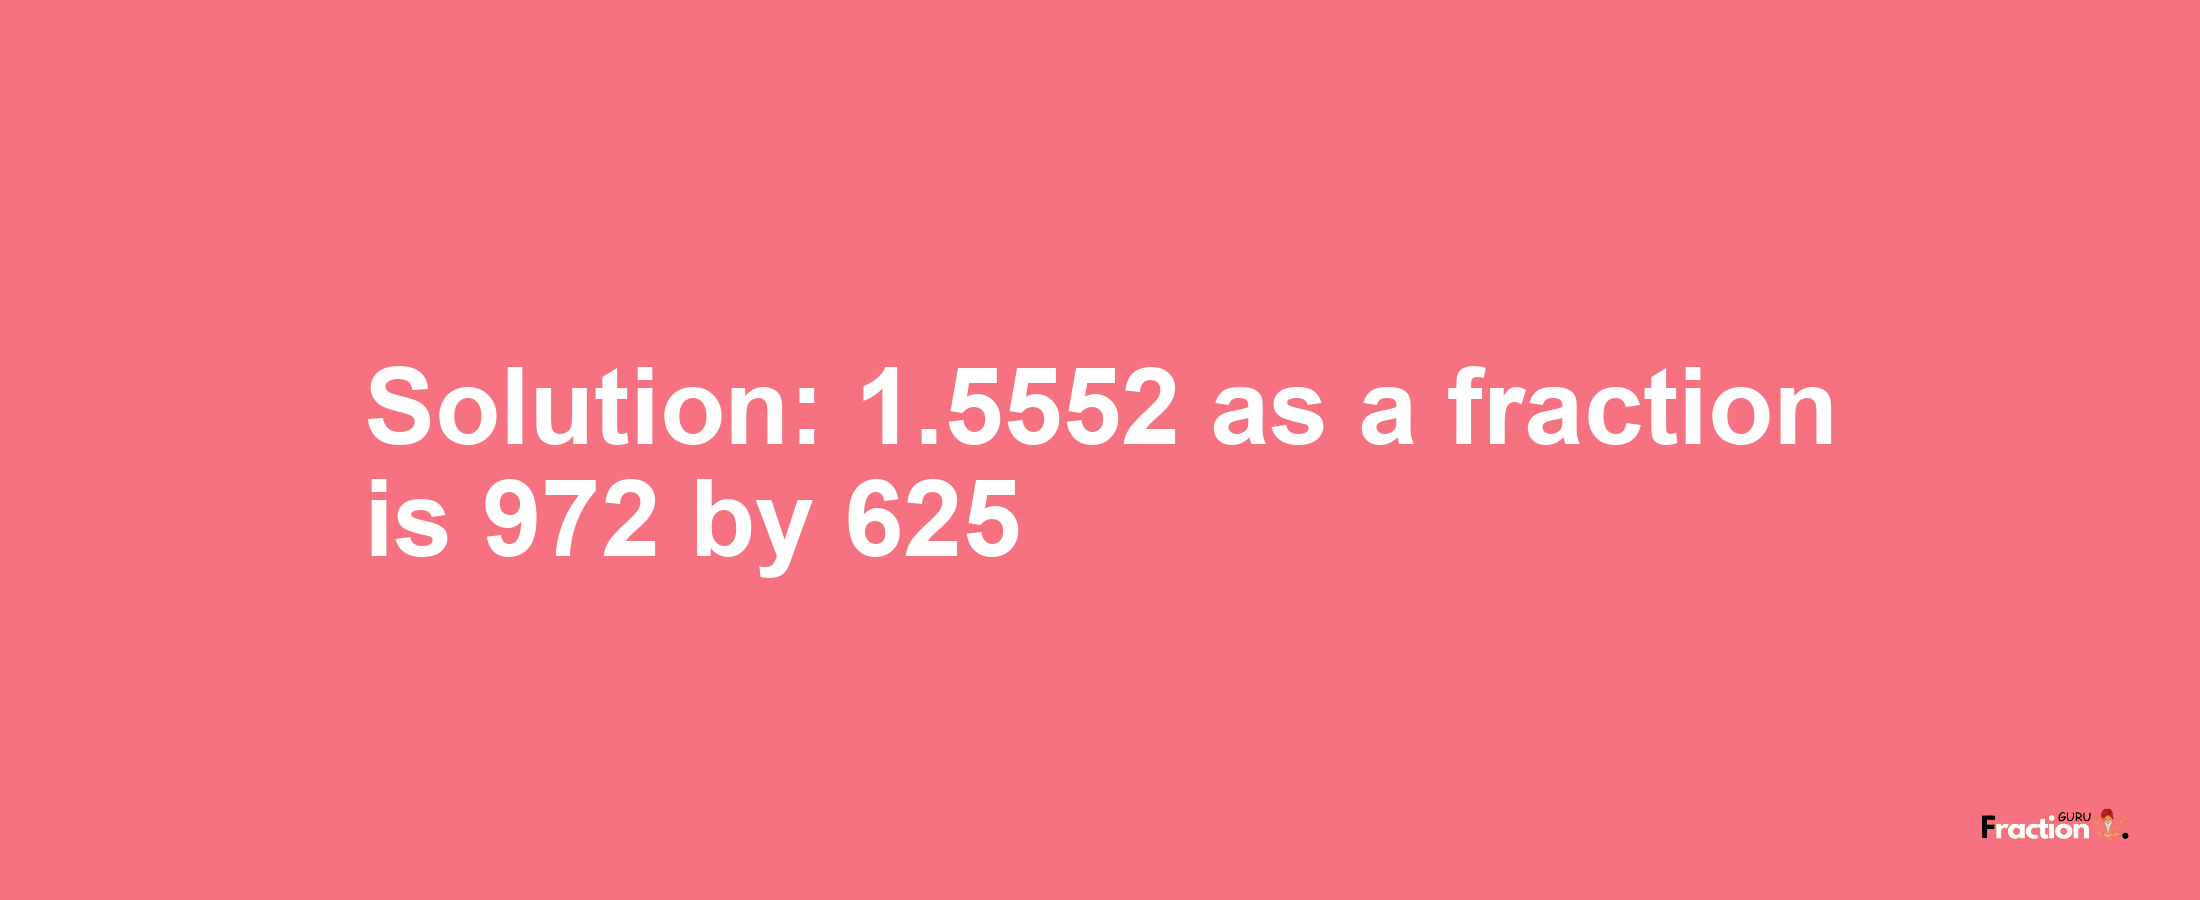 Solution:1.5552 as a fraction is 972/625